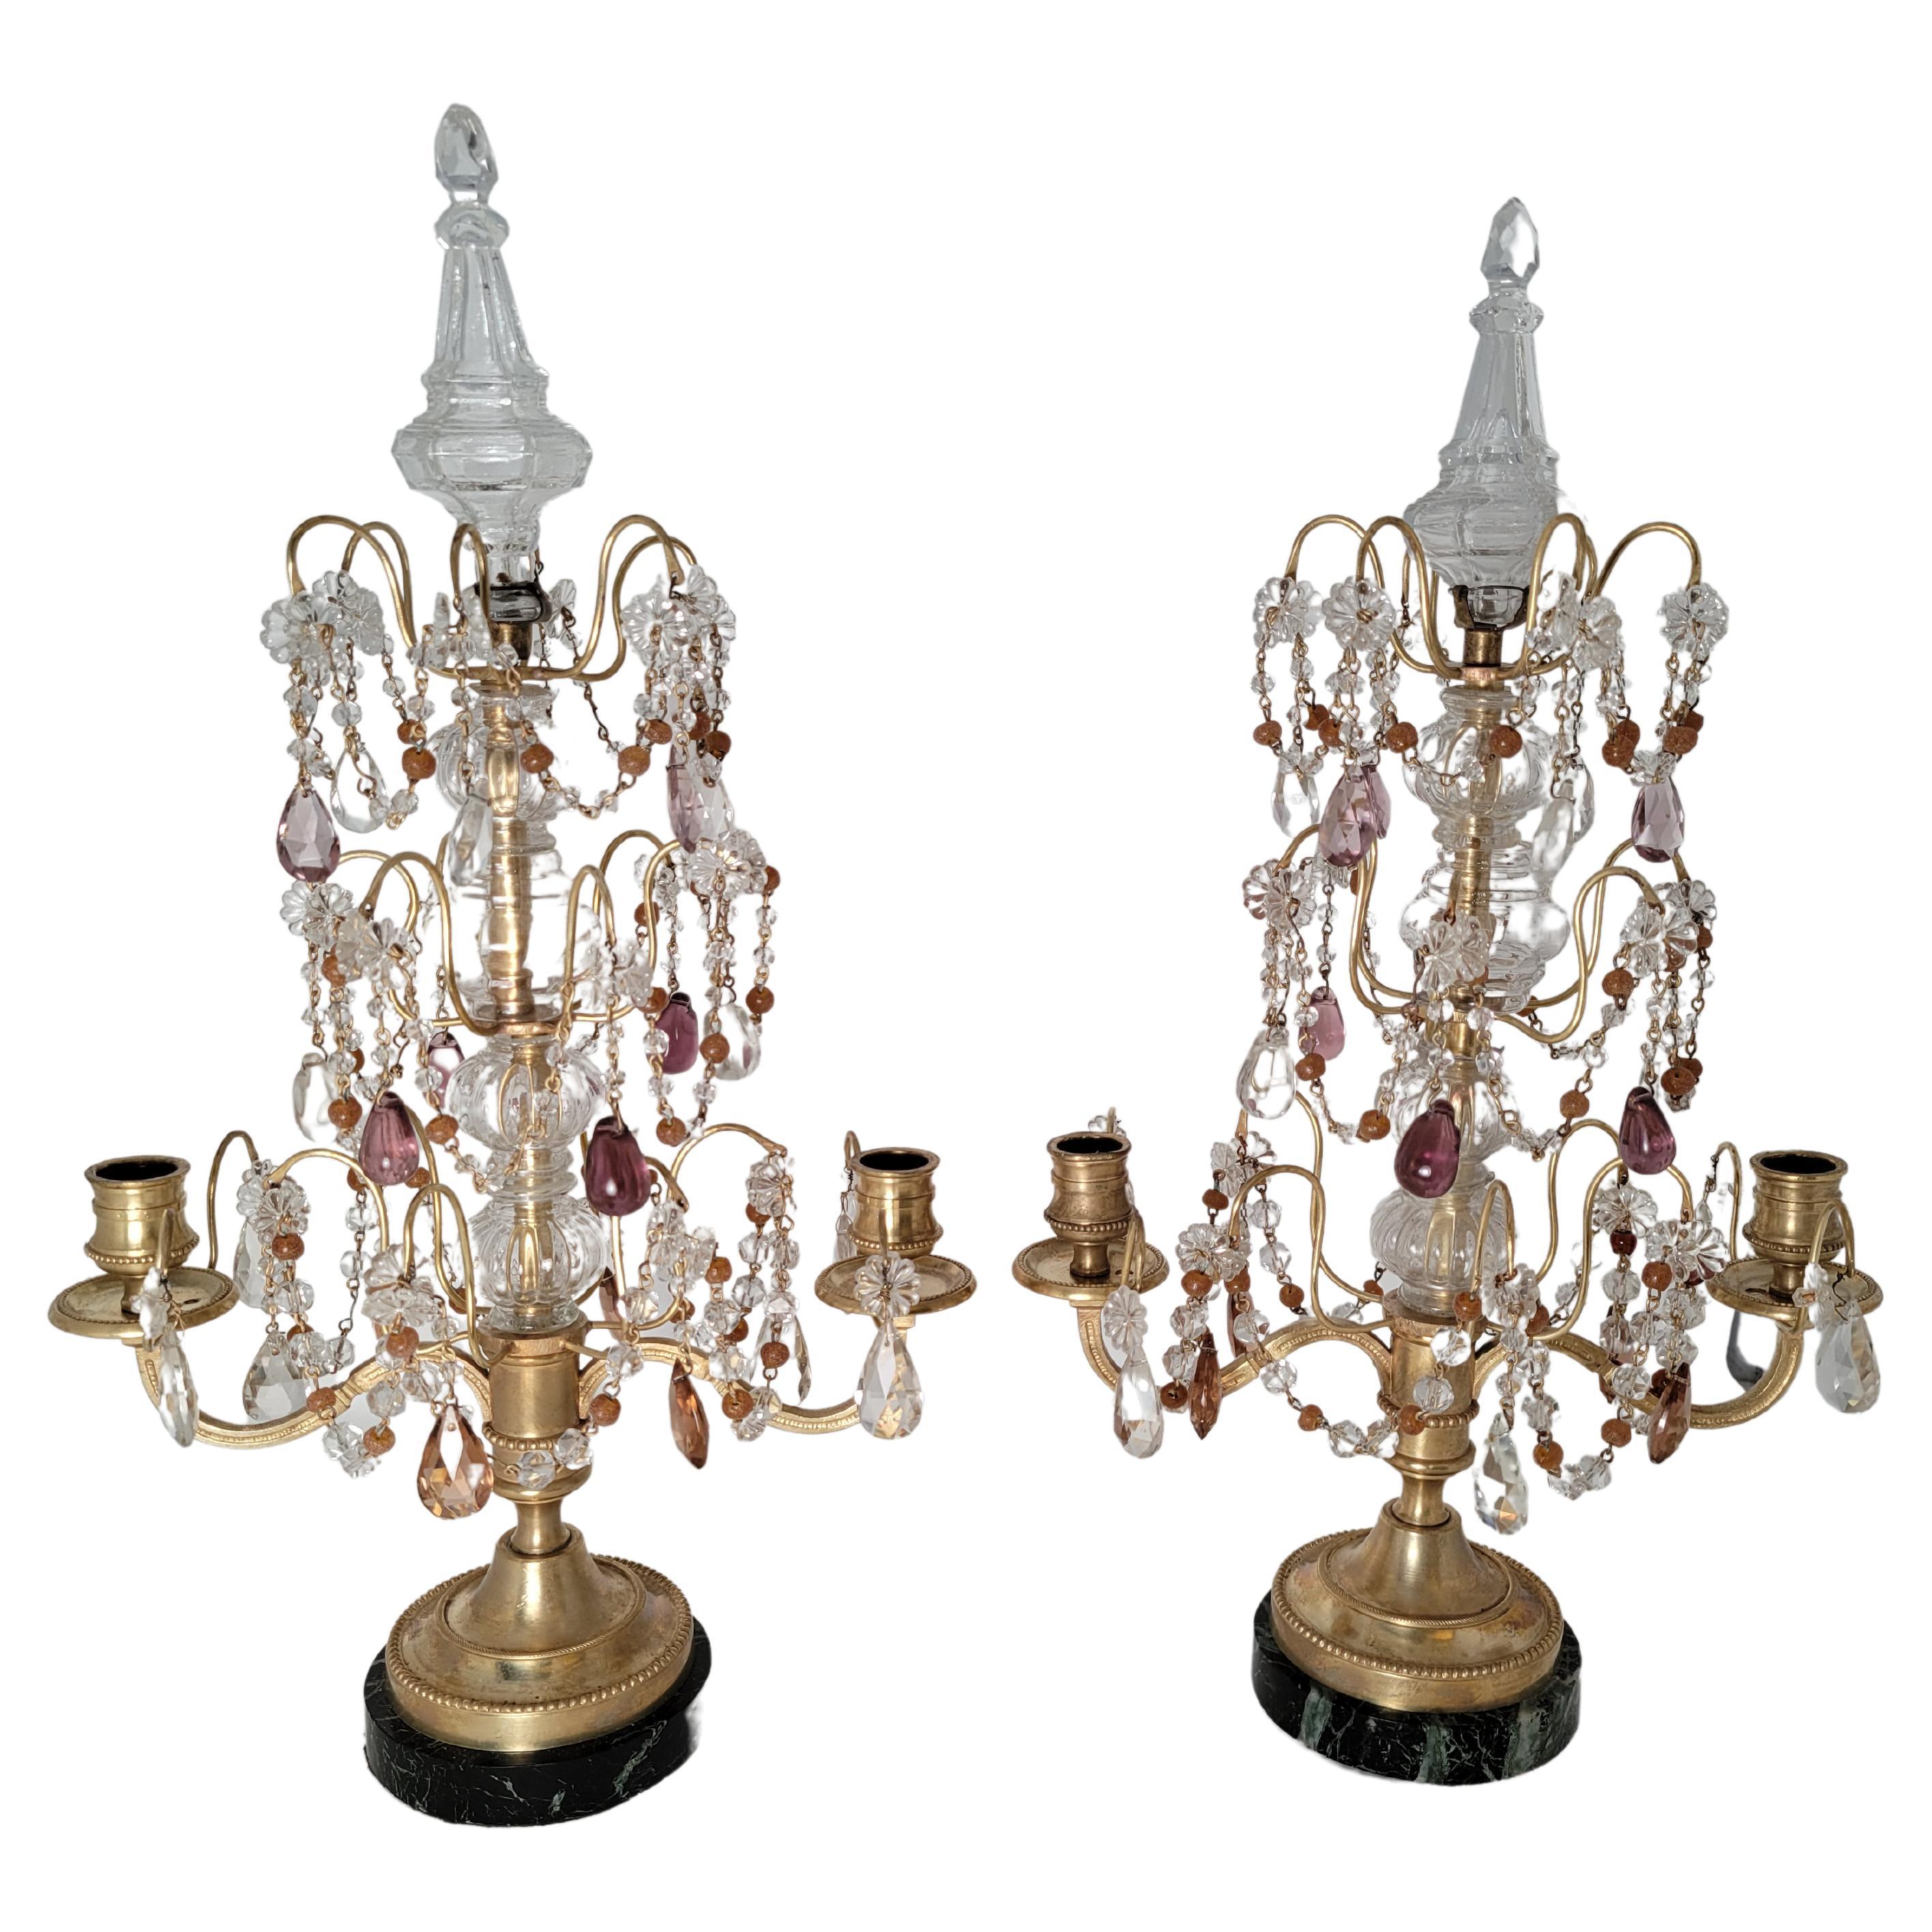 Pair of Antique French Baccarat Crystal Candelabra